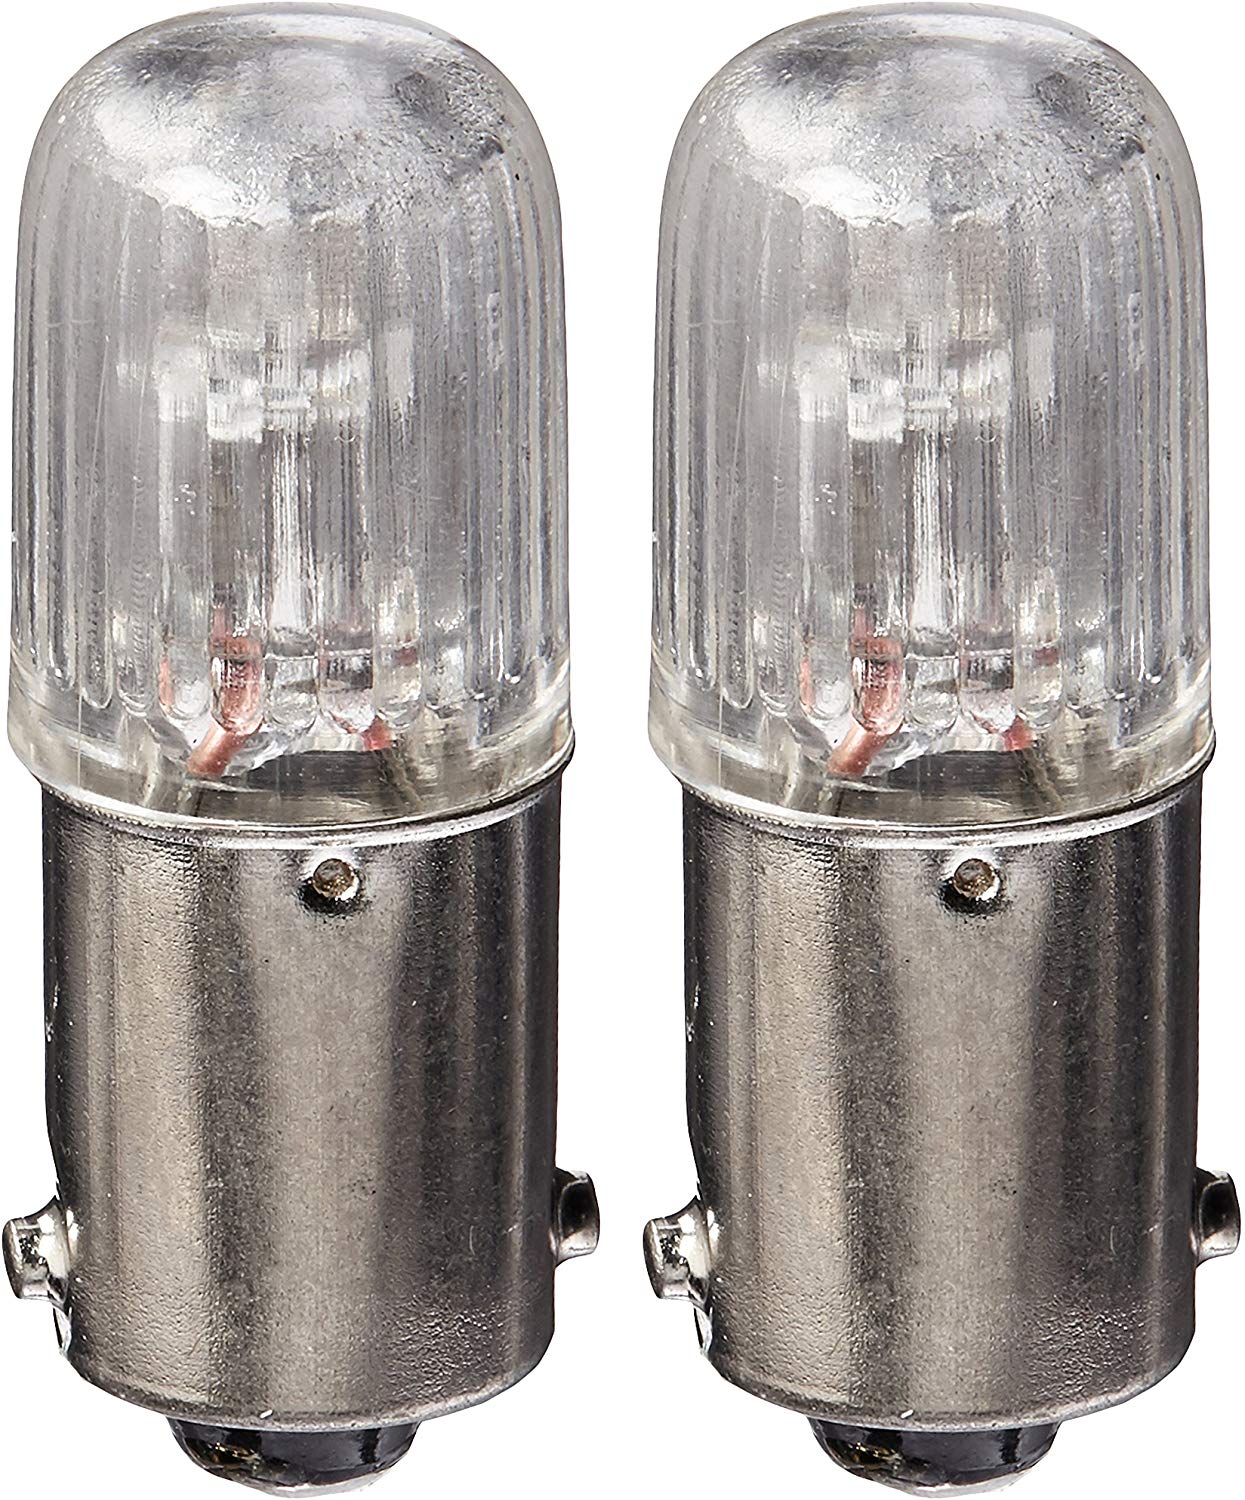 Tool Aid S&G 23904 Bulb for in-Line Ignition Spark Checker